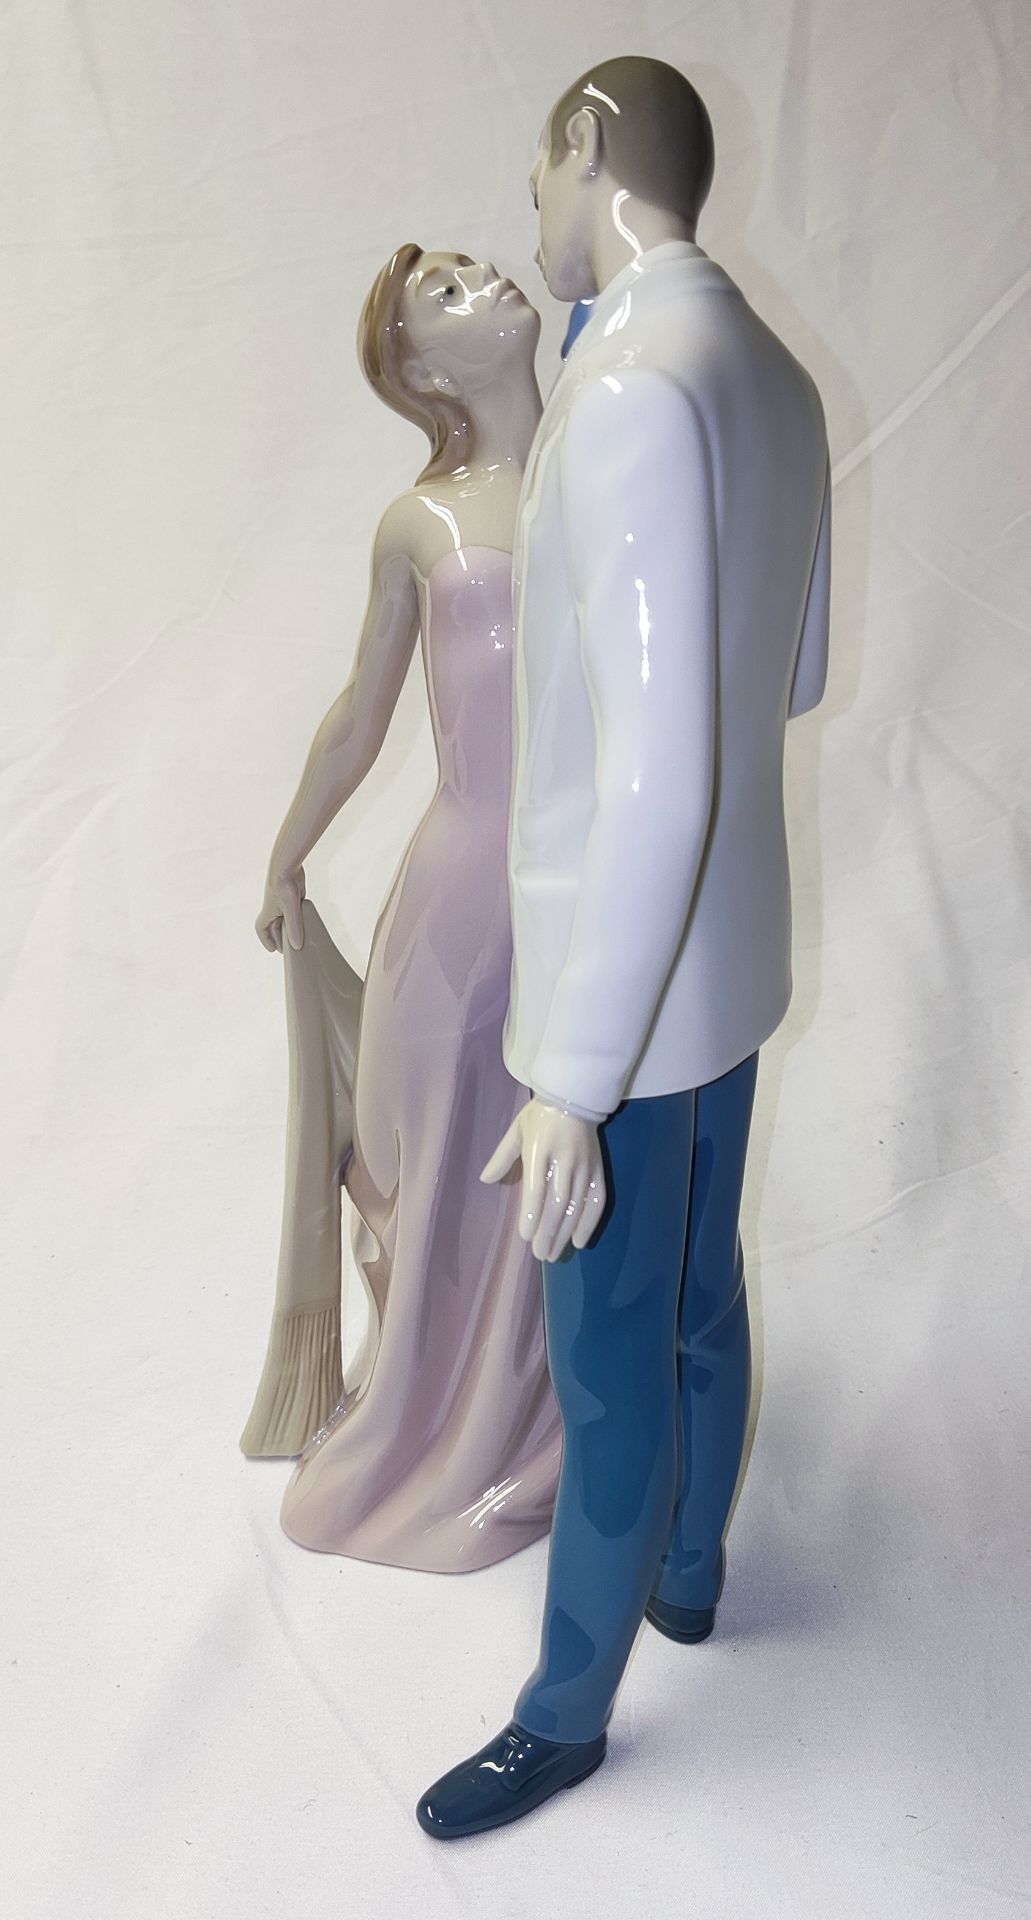 1 x LLADRO Happy Anniversary Porcelain Statue - New/Boxed - RRP £520.00 - Ref: /HOC232/HC5 - CL987 - - Image 19 of 25